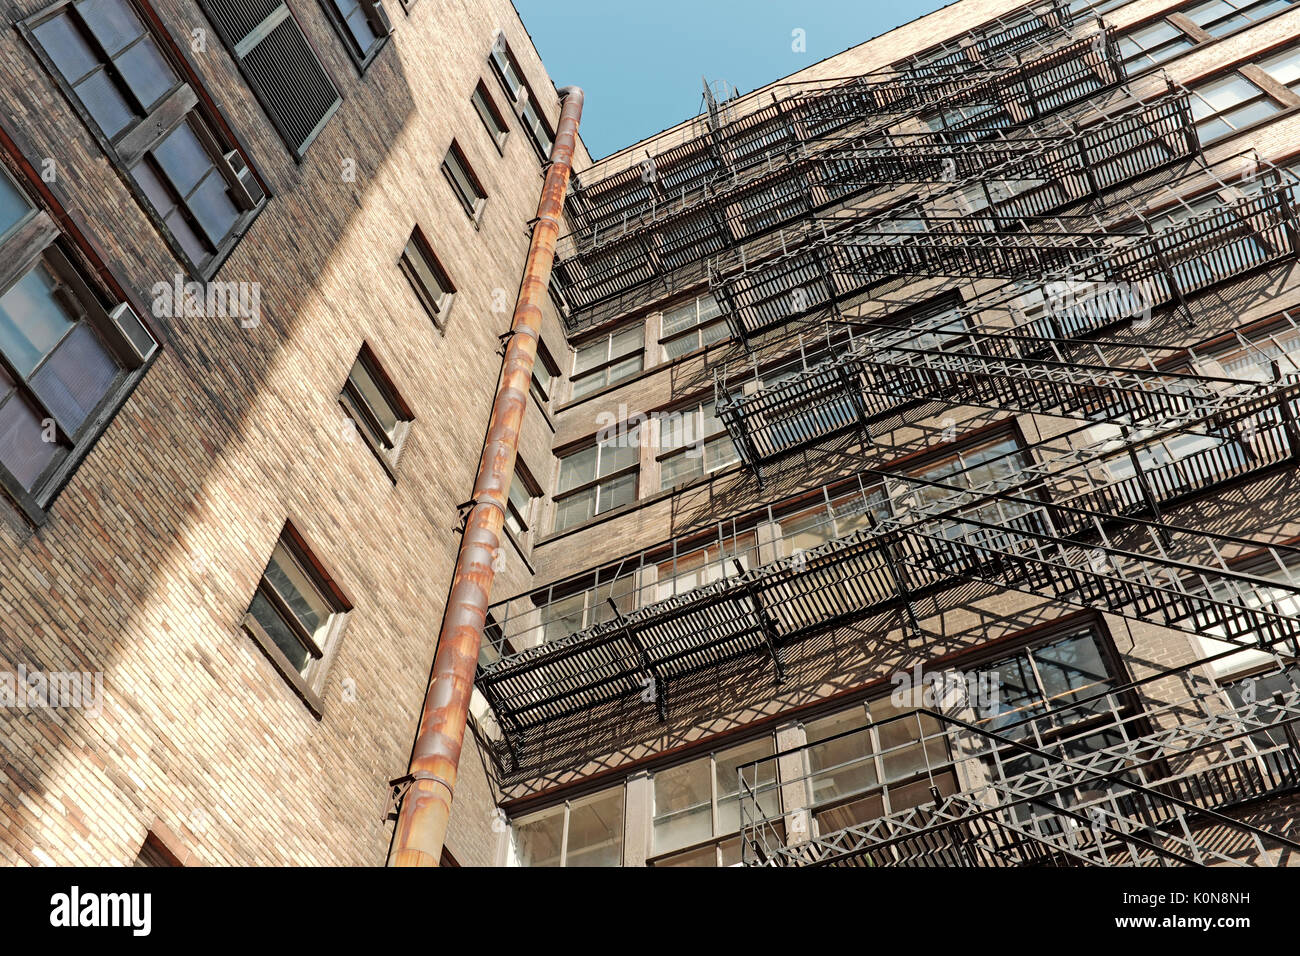 External fire escape steel stairs/platforms attached to the exterior of an old office building in Cleveland, Ohio, USA Stock Photo